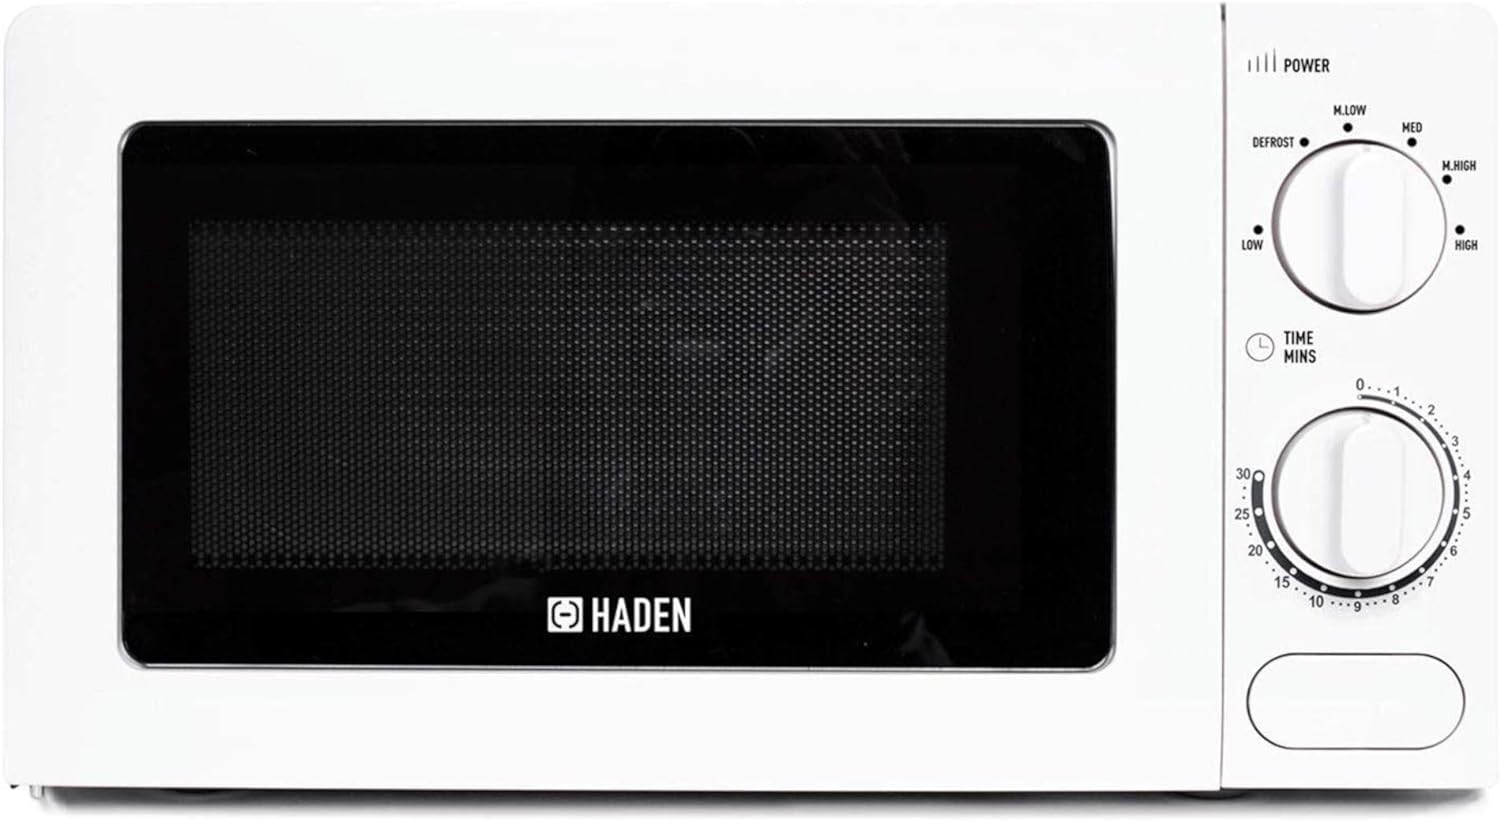 Haden 17L White Microwave - Compact, Versatile, and Elegant 700W Countertop Microwave with Safety Lock, 6 Power Levels, and 30-Min Timer - Perfect for Small Kitchens and Caravans